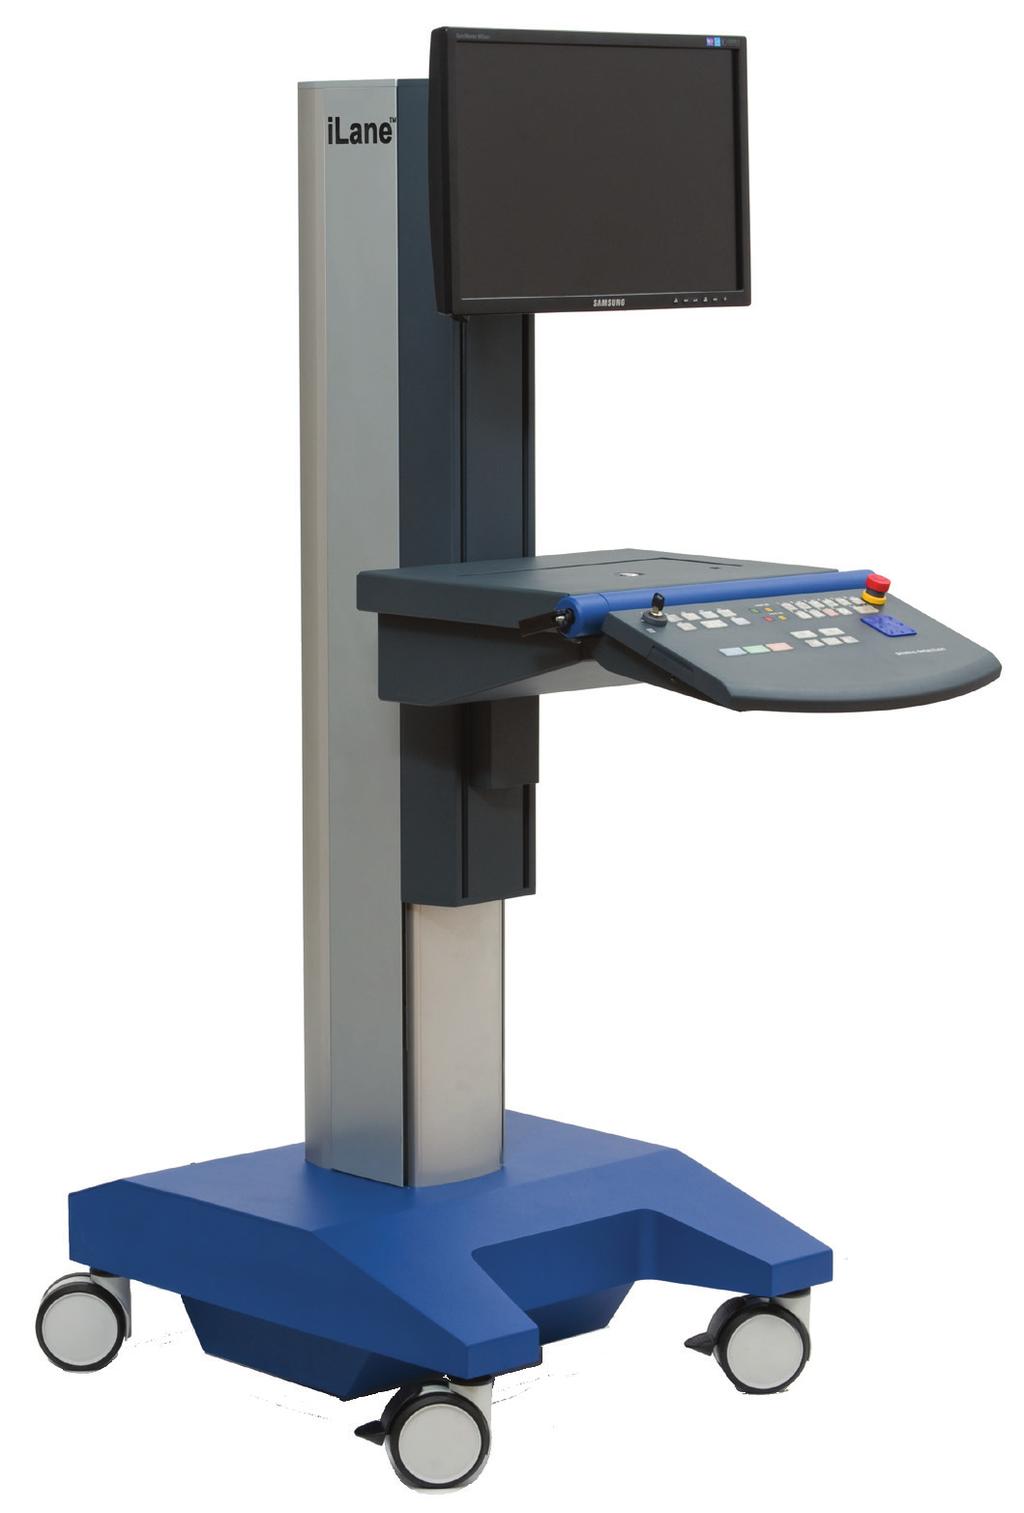 Operator Consoles ilane Operator Consoles for analyst and recheck workstations are the perfect addition to any security Checkpoint.